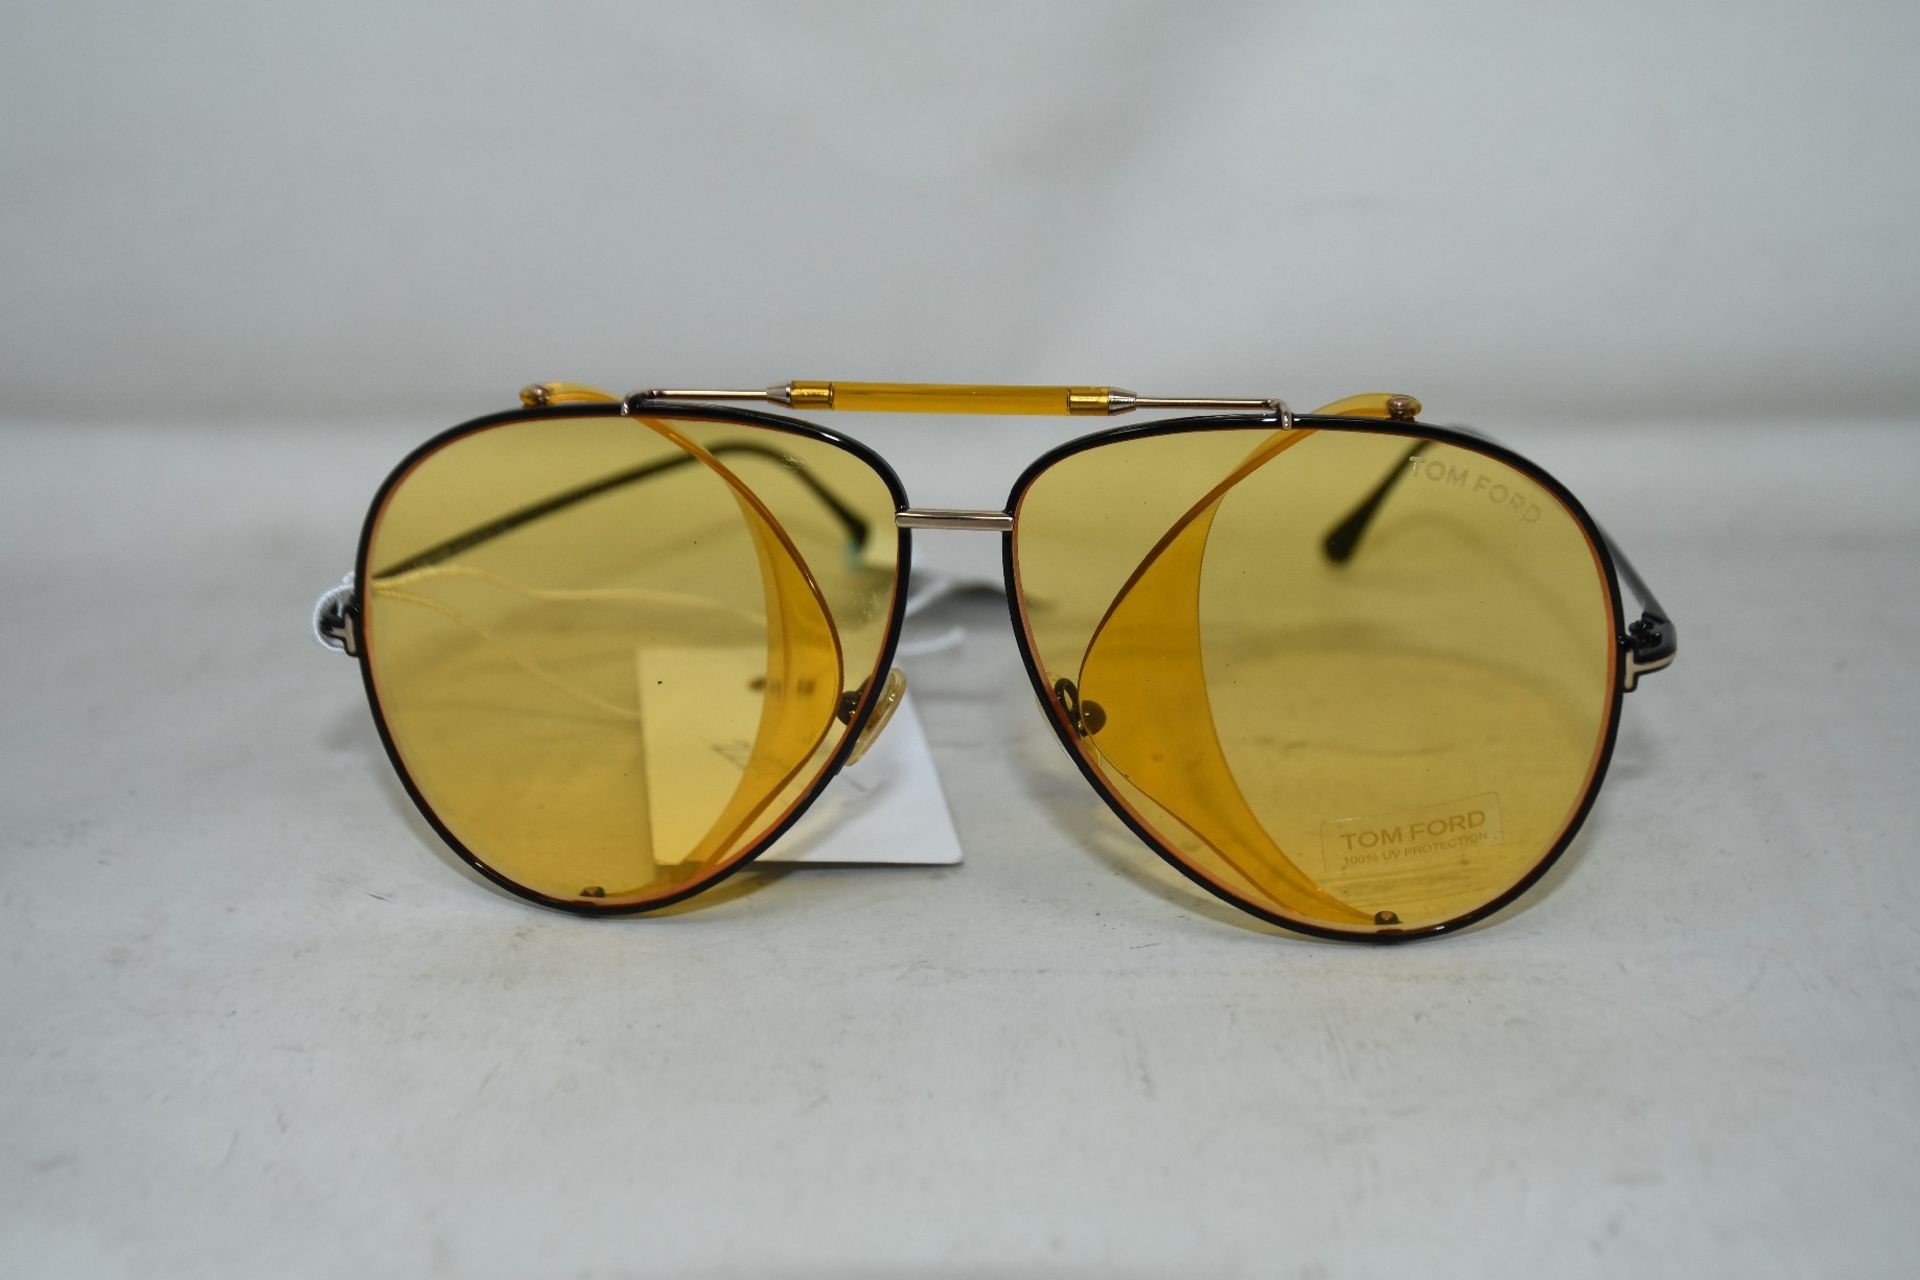 A pair of as new Tom Ford Jack-02 sunglasses (No case - RRP £335).